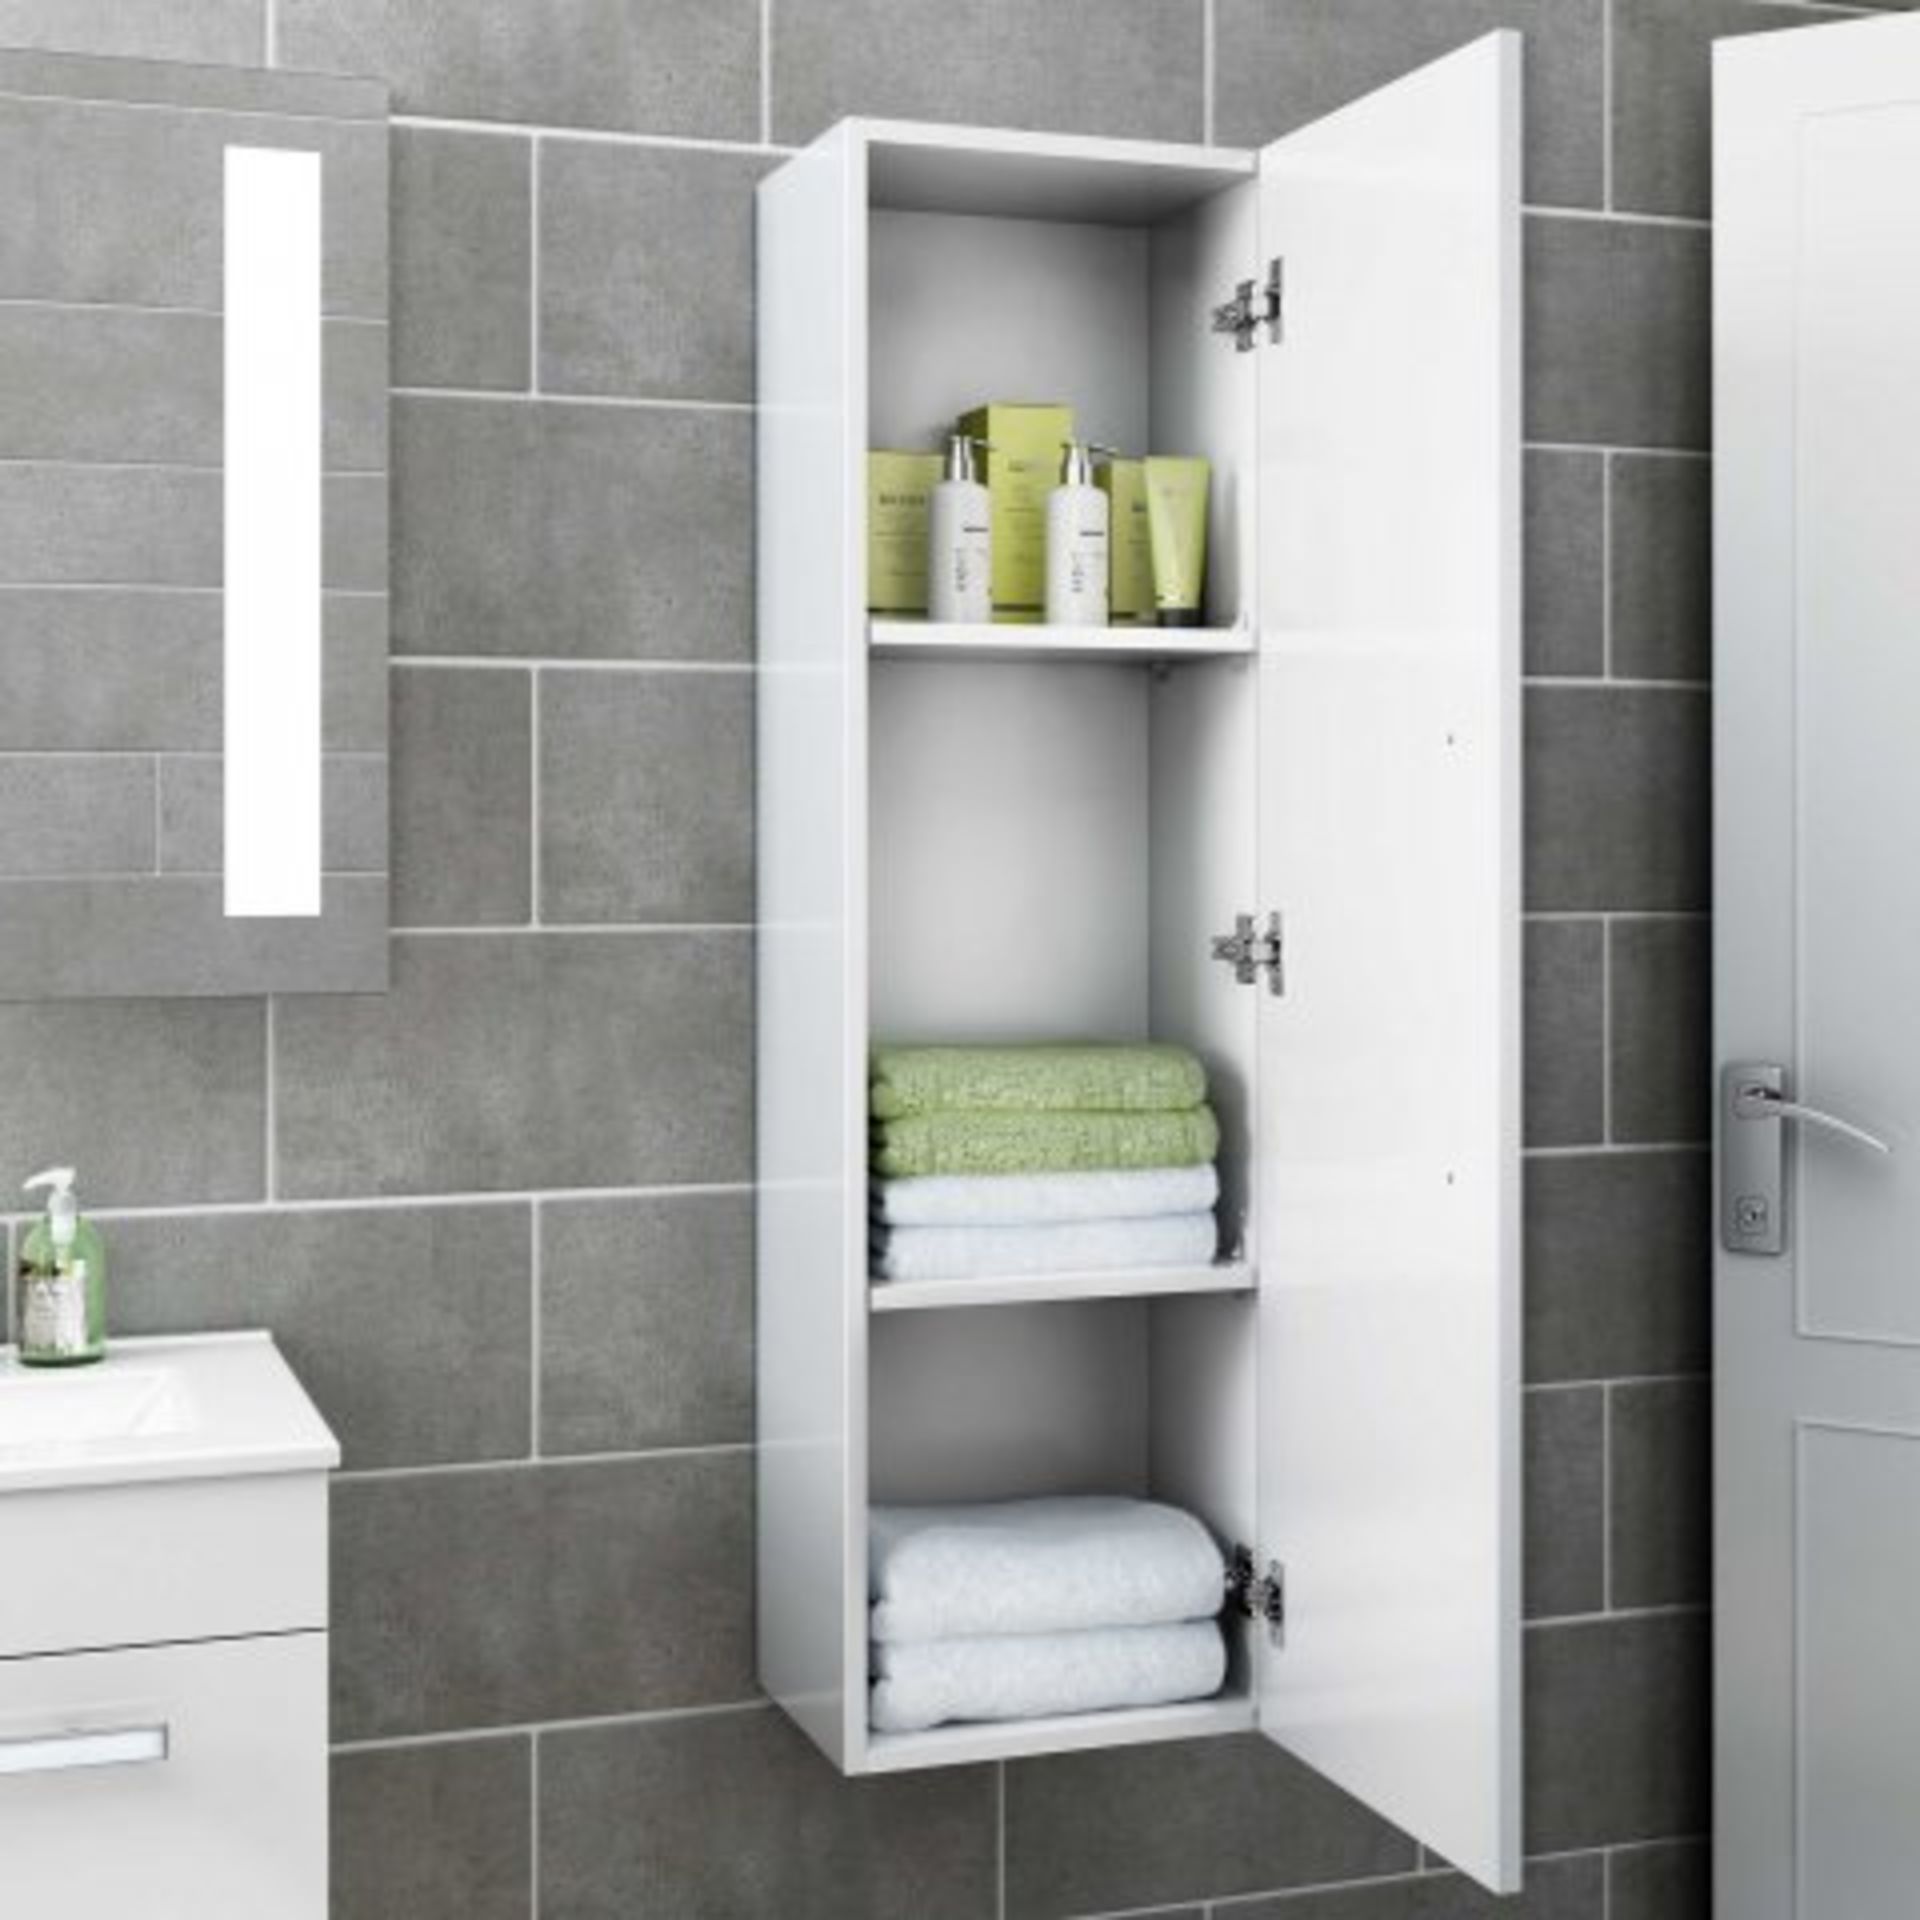 (K46) 1200mm Avon Gloss White Tall Storage Cabinet - Wall Hung. RRP £249.99. Contemporary Look - Image 3 of 5